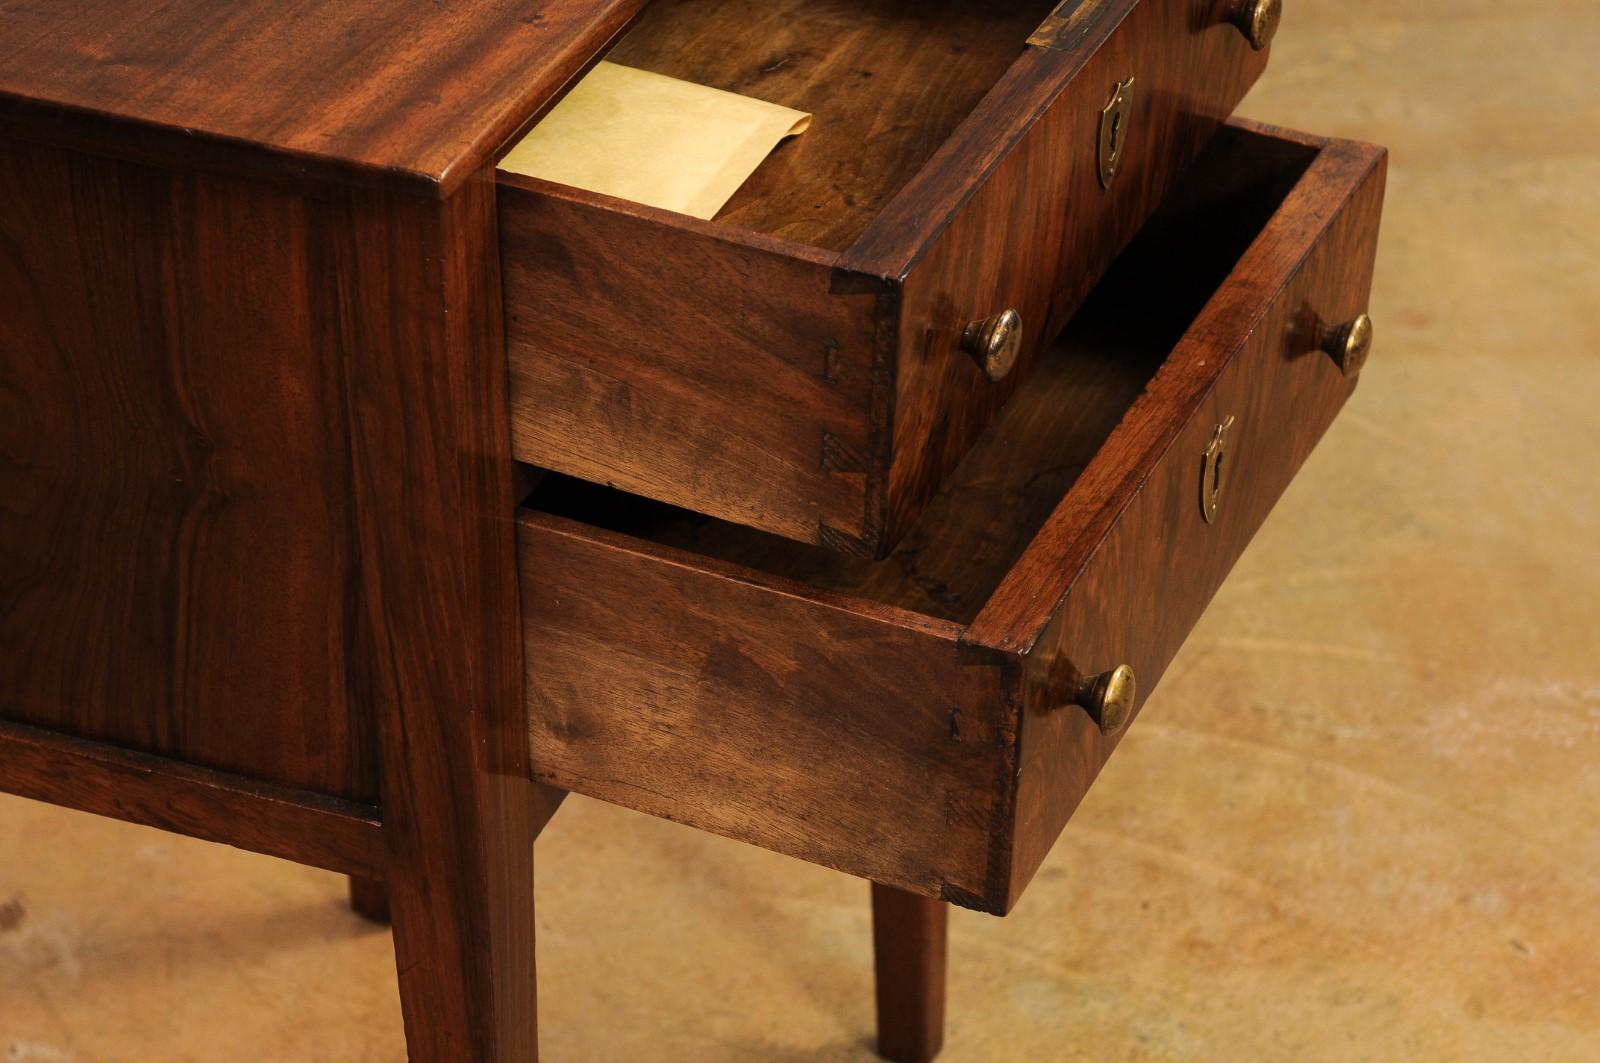 Italian Directoire 19th Century Walnut Bedside Table with Two Veneered Drawers For Sale 2